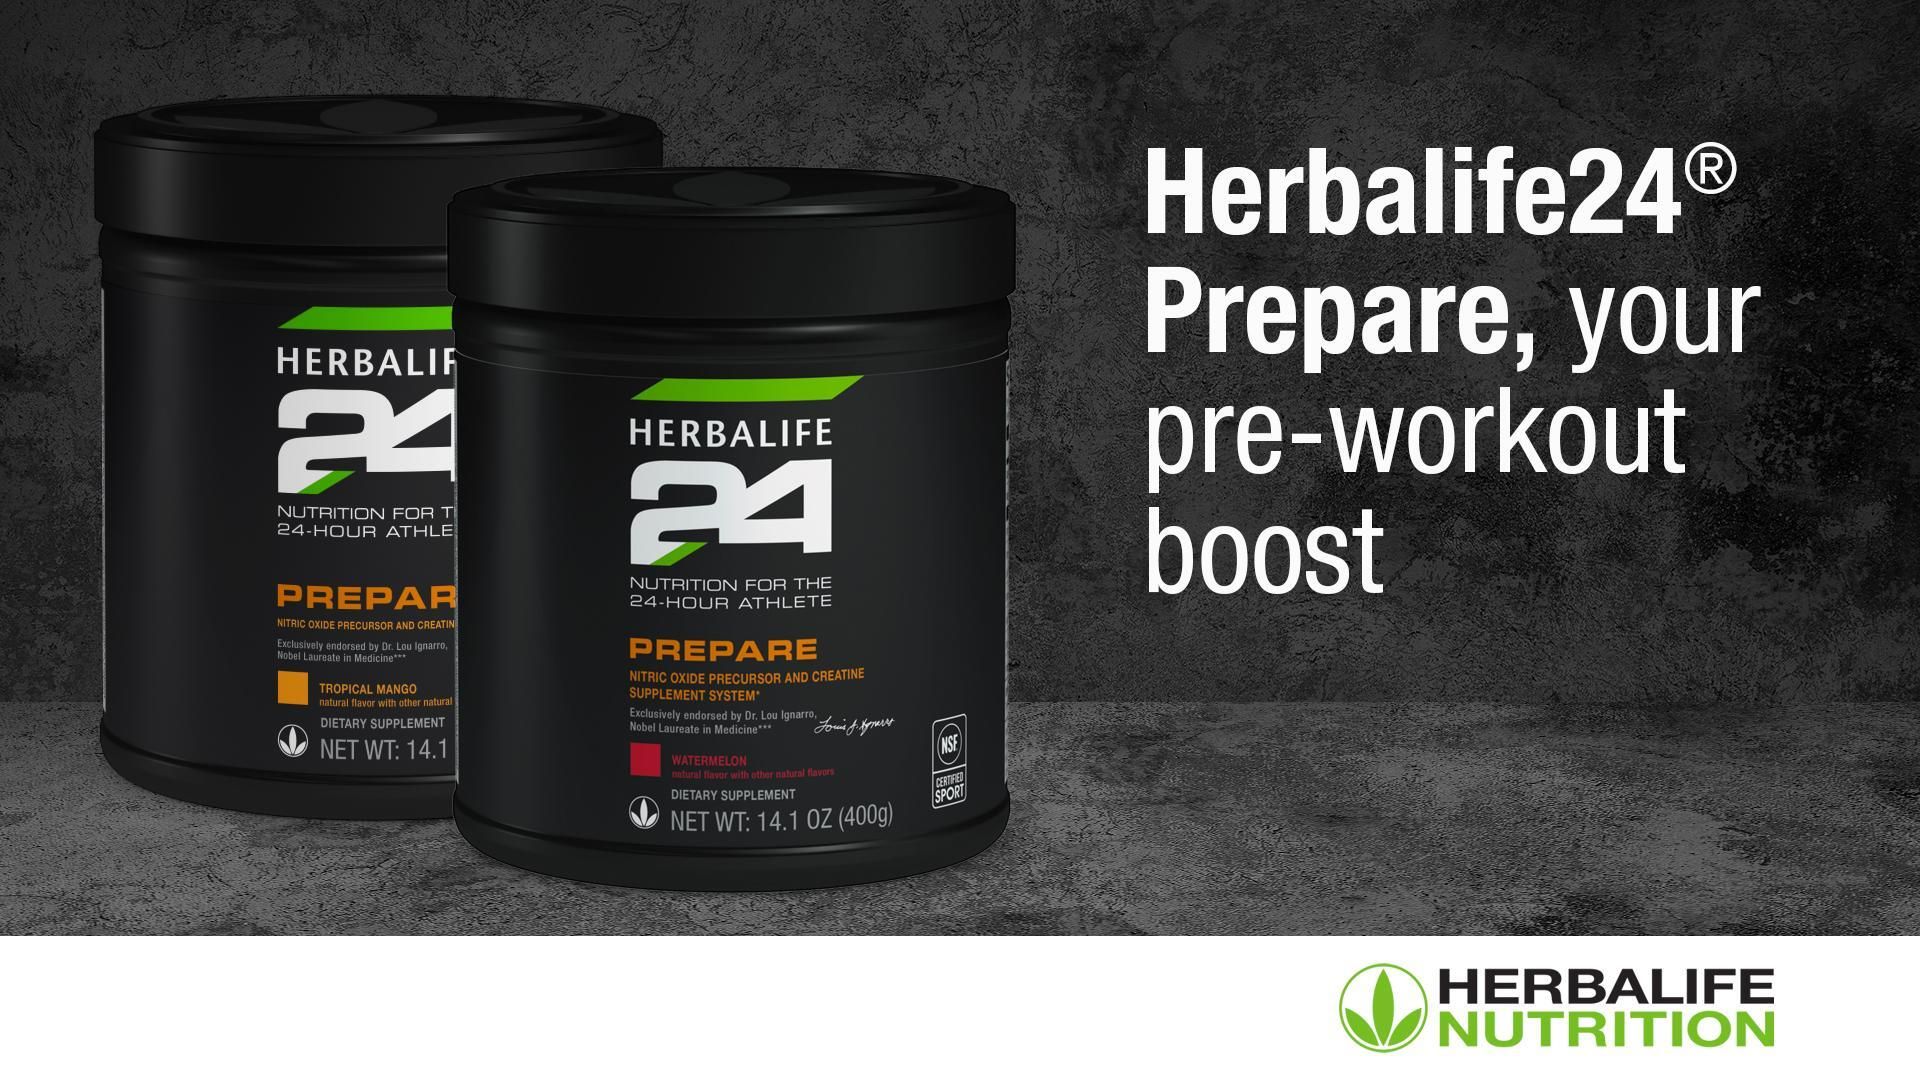 Herbalife24® Prepare: Know the Products